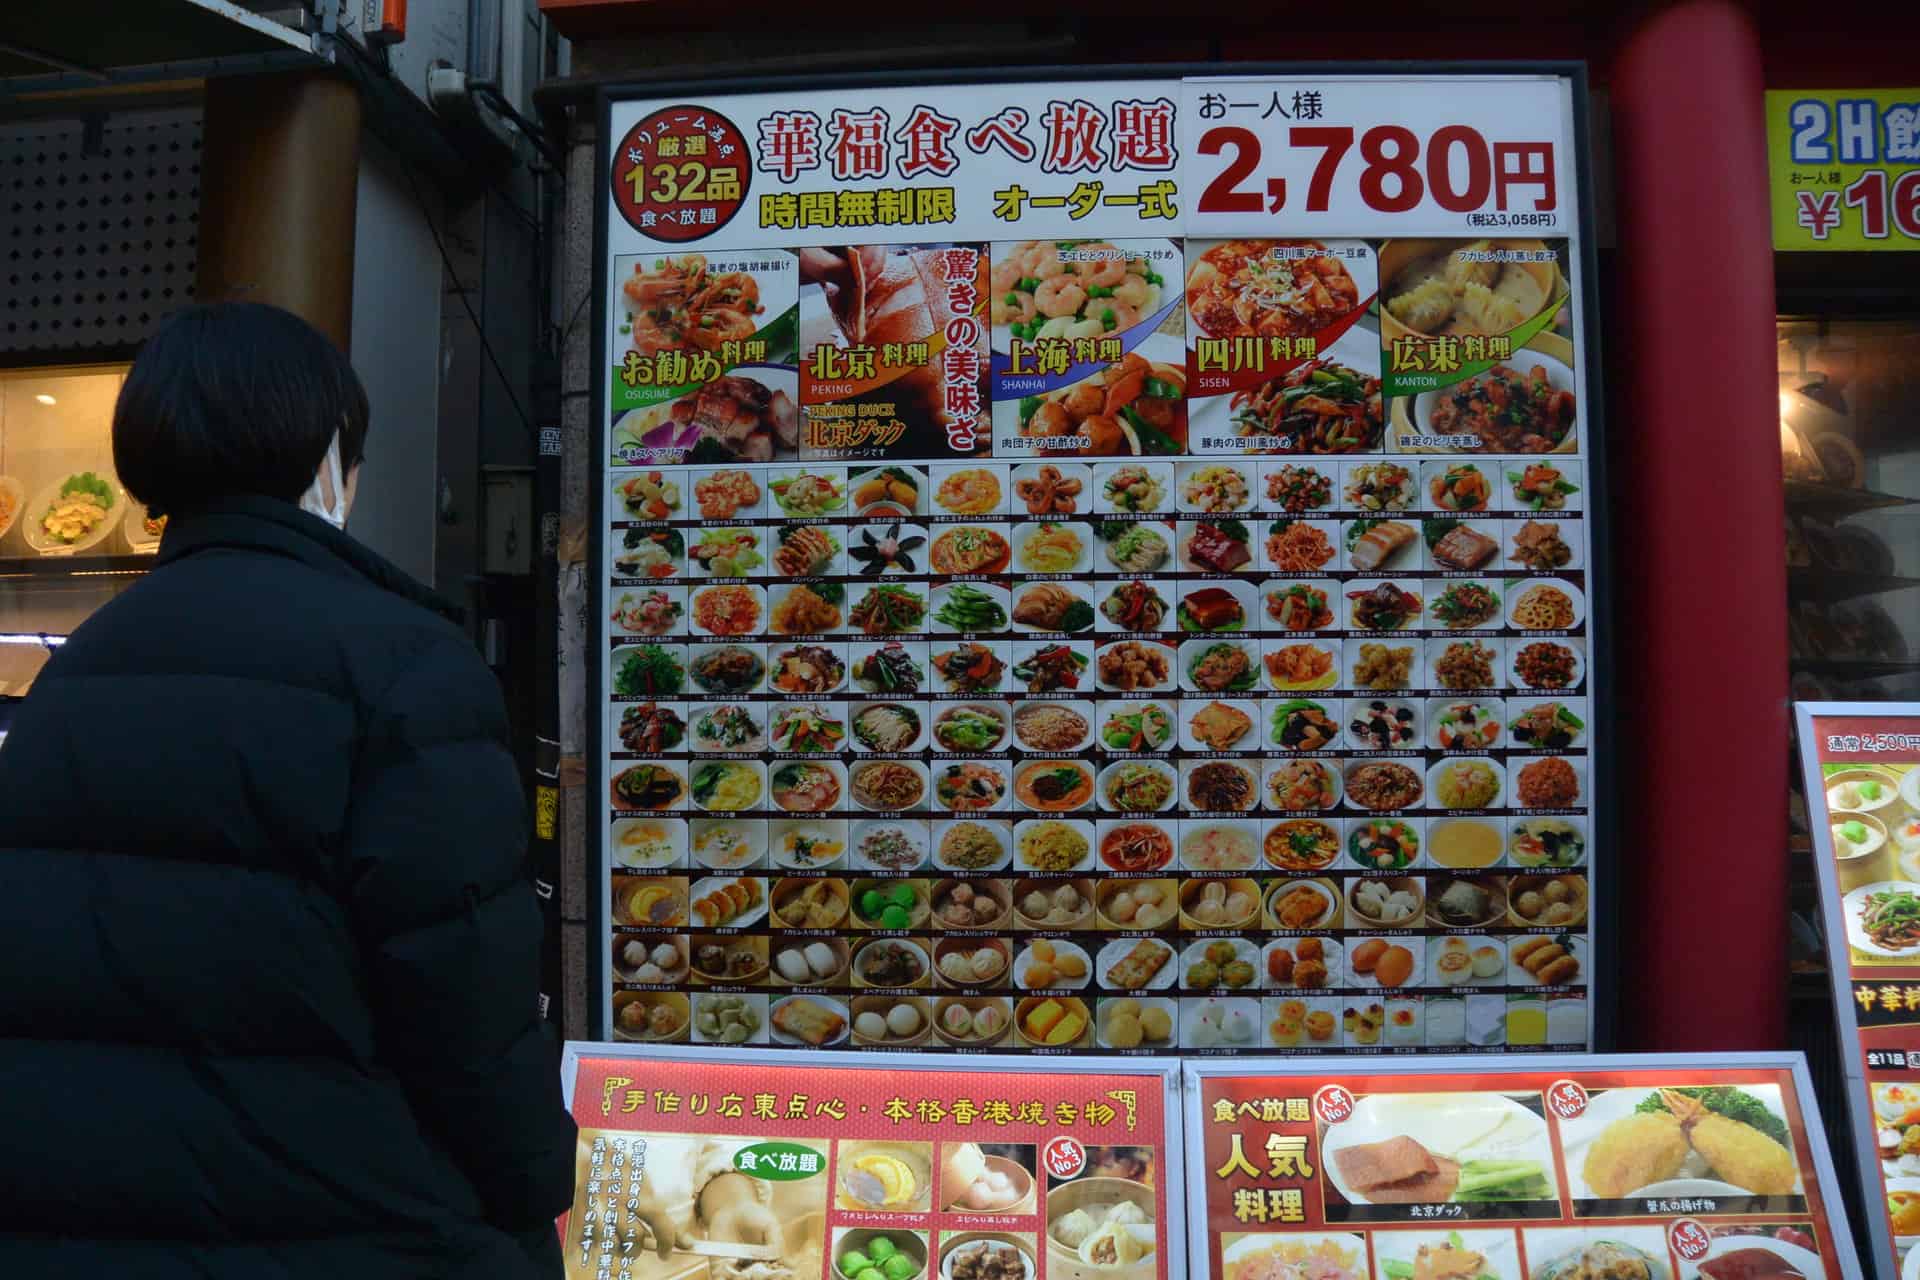 the sign of All-you-can-eat in Chinatown in Yokohama, Japan